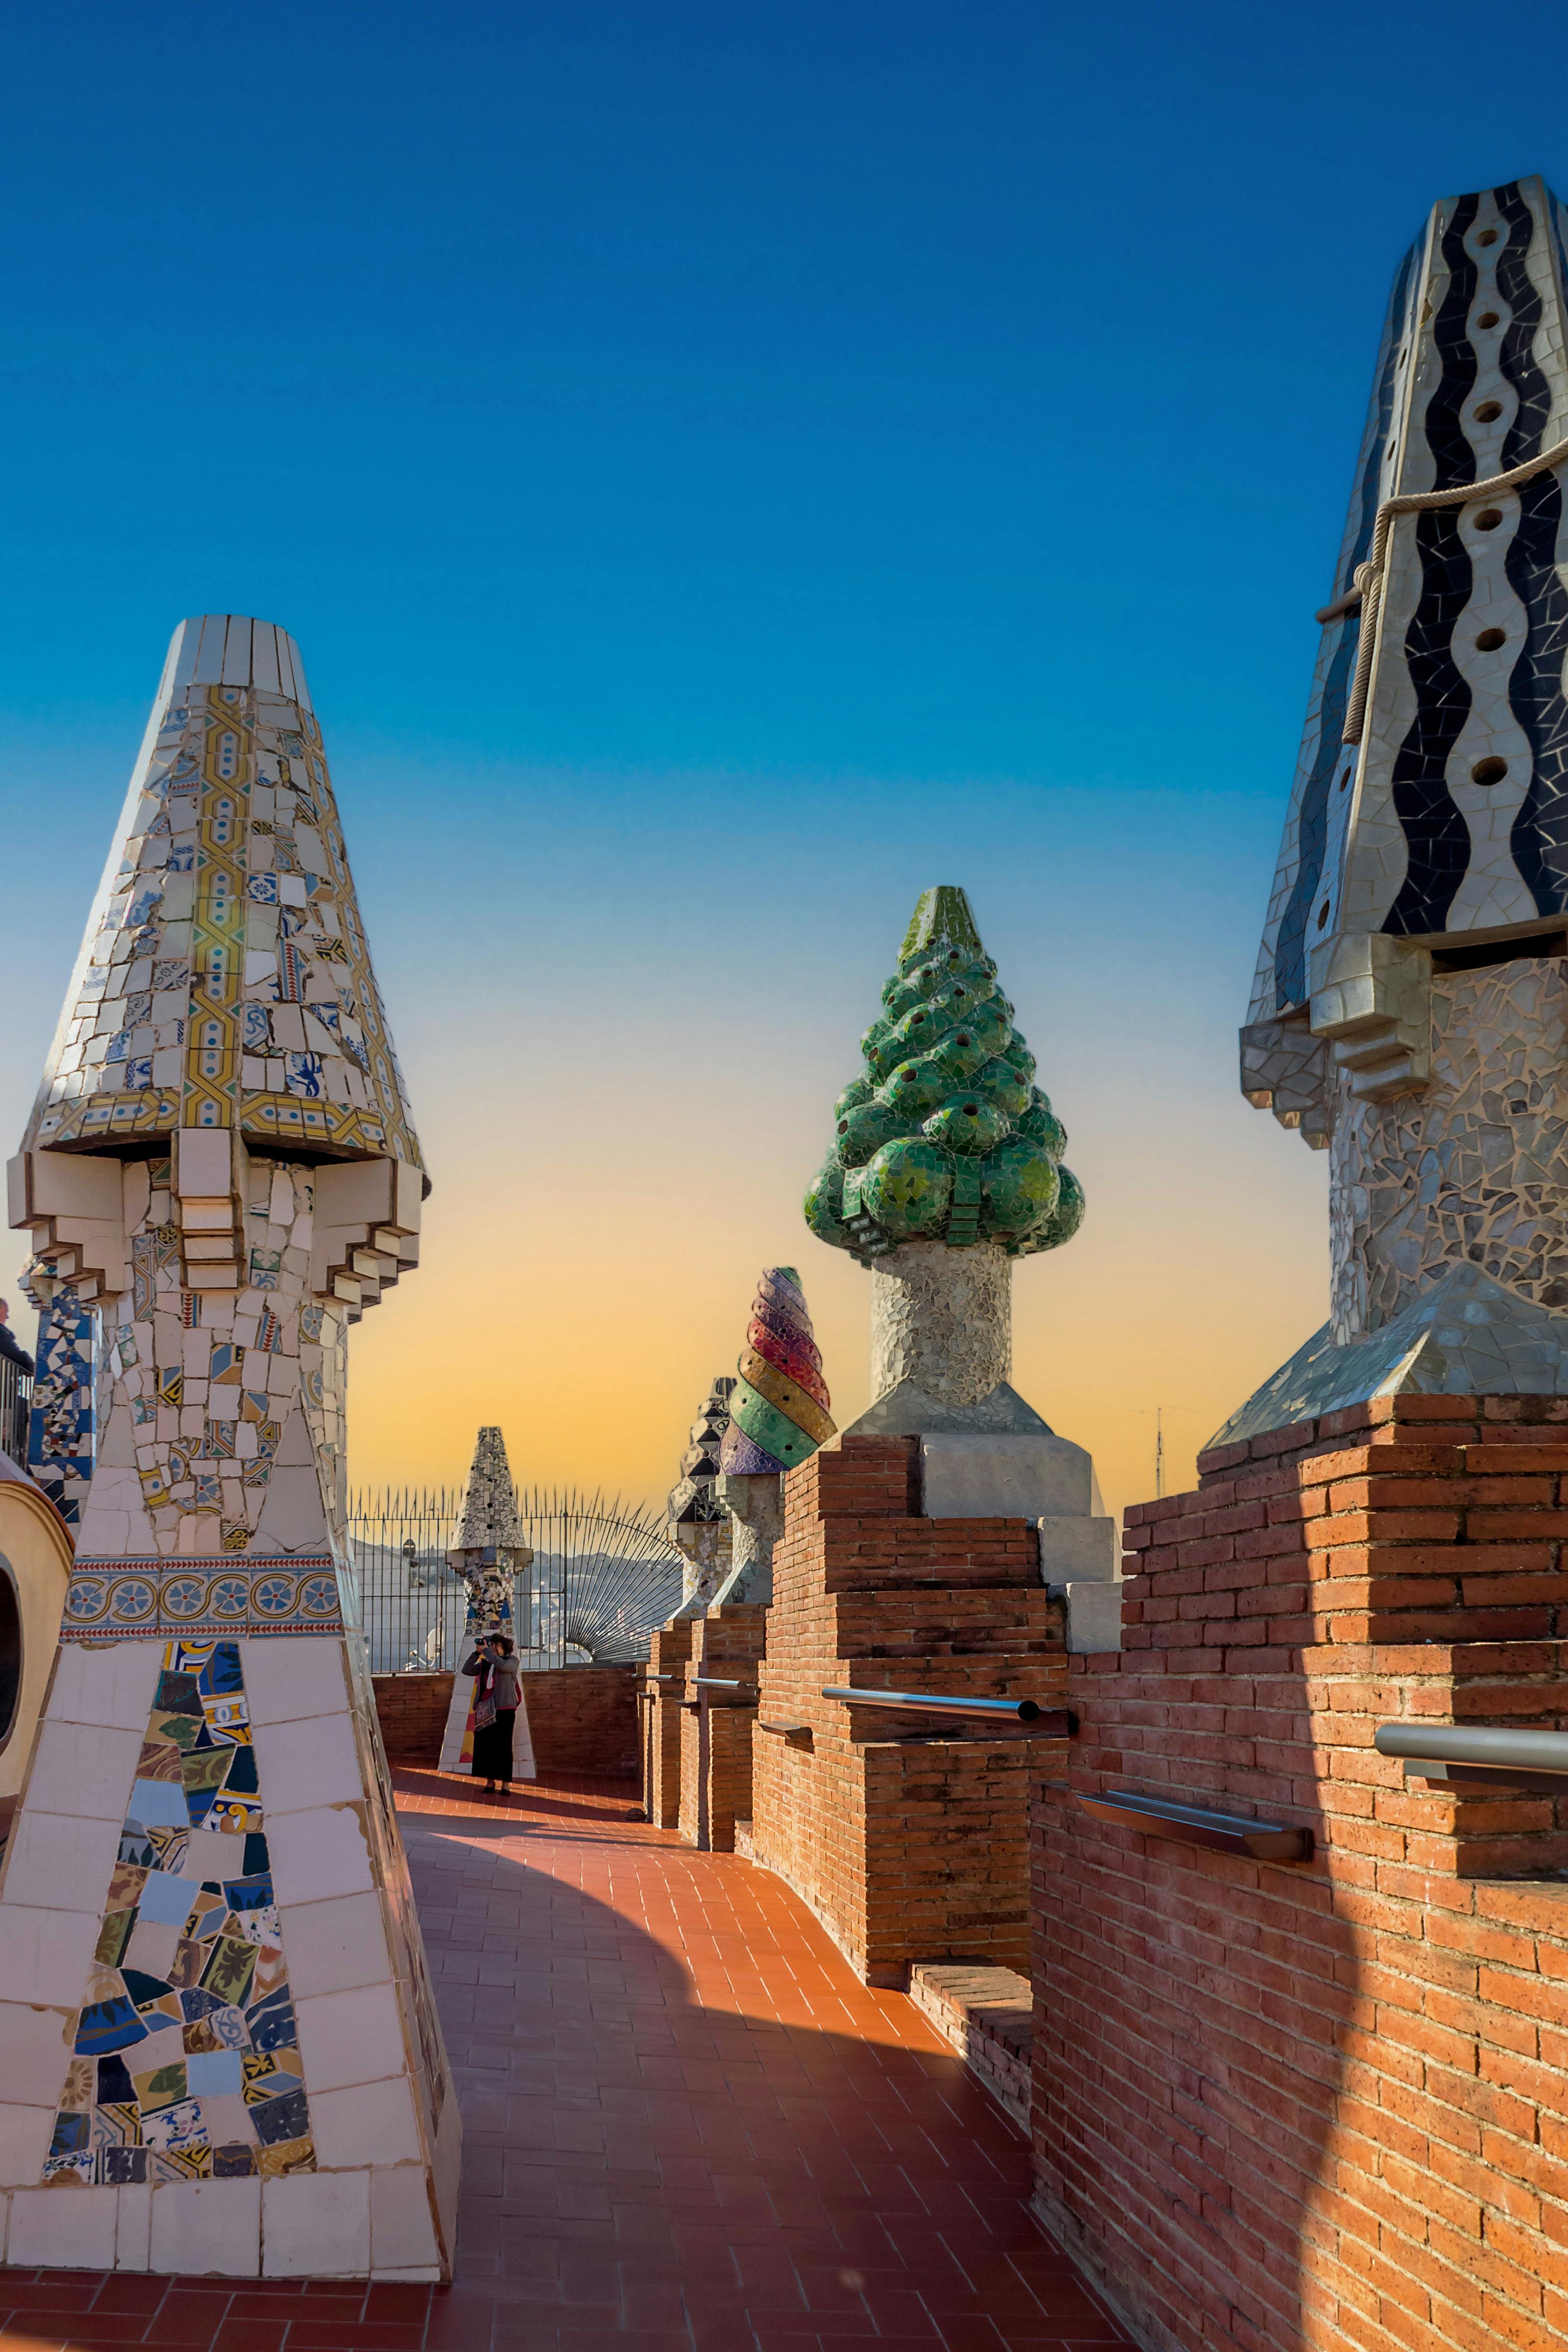 mosaic chimneys at the palace guell roof in barcelona spain